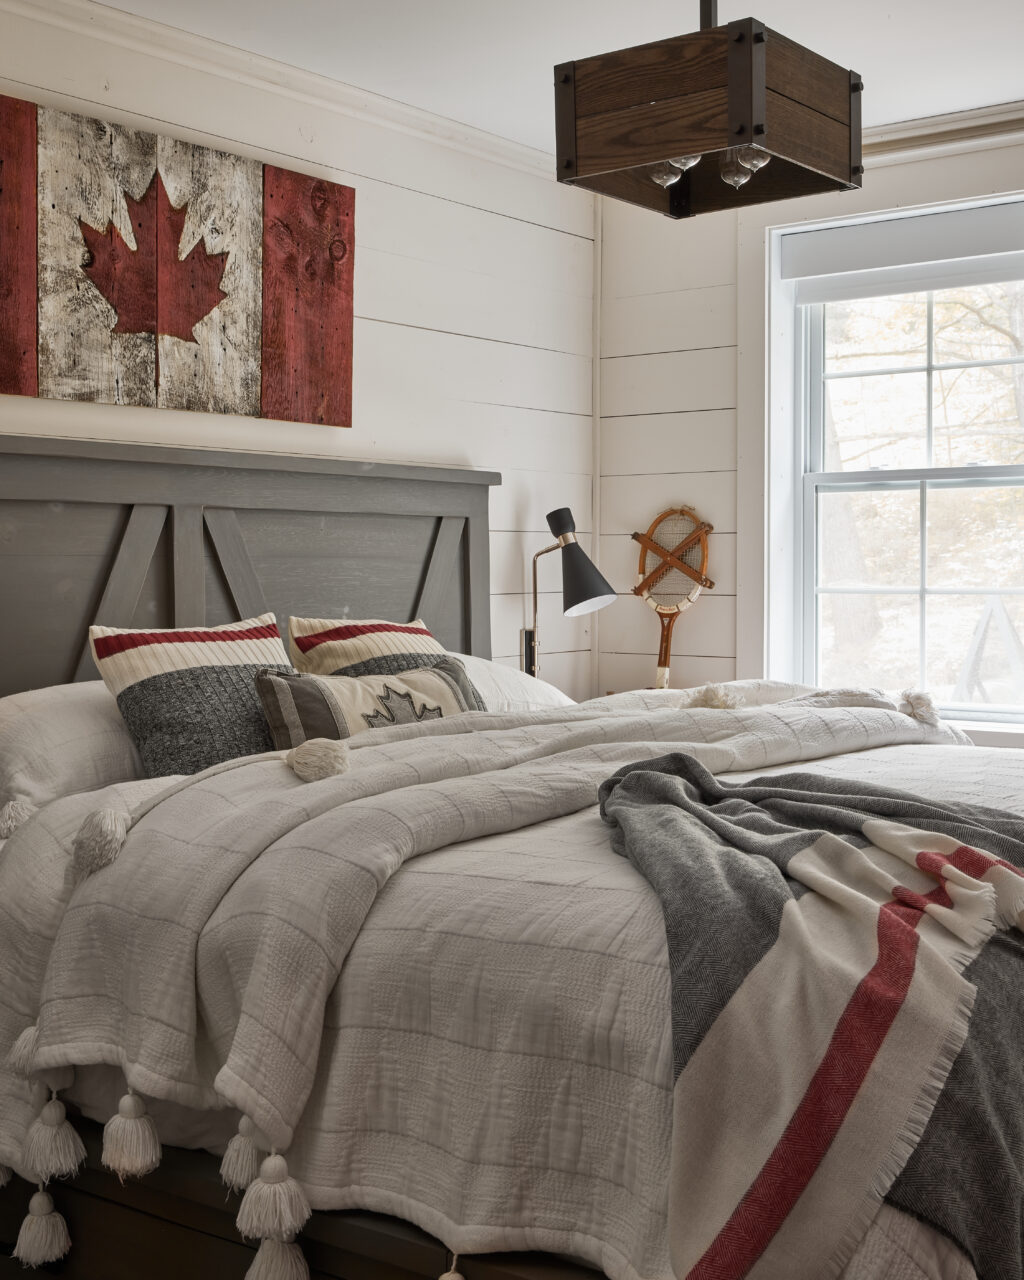 White walled room with roots theme decor (canadian flag above bed, grey and red stripes bedding & grey headboard)